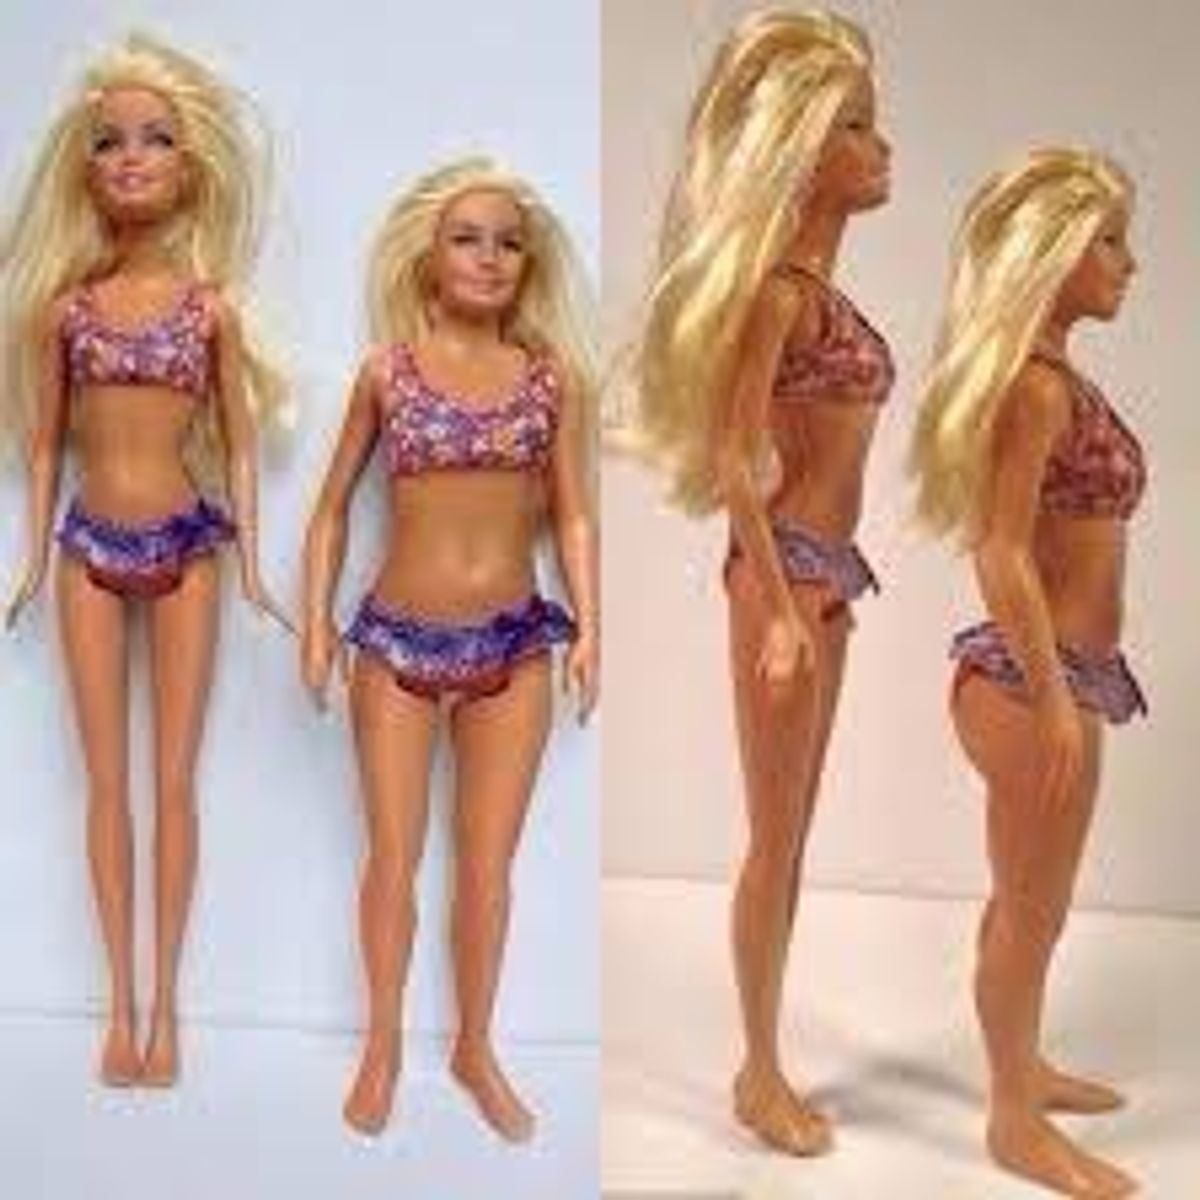 Looking Like A Barbie Is Not #Goals